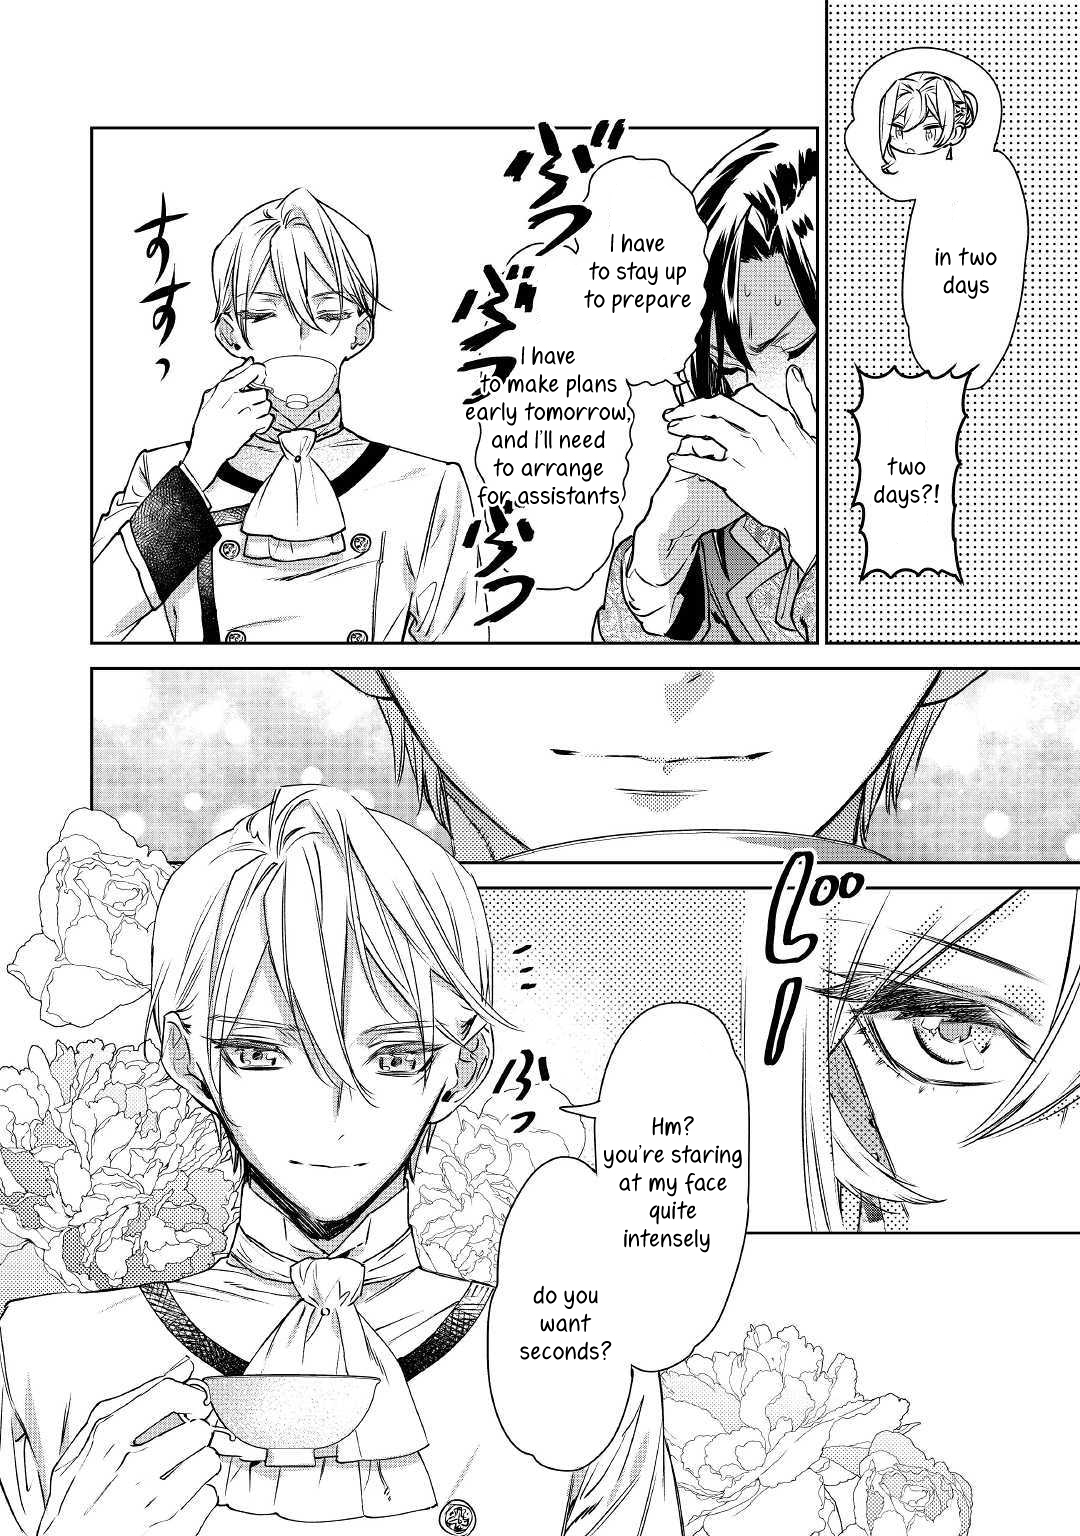 May I Please Ask You Just One Last Thing? Ch. 9